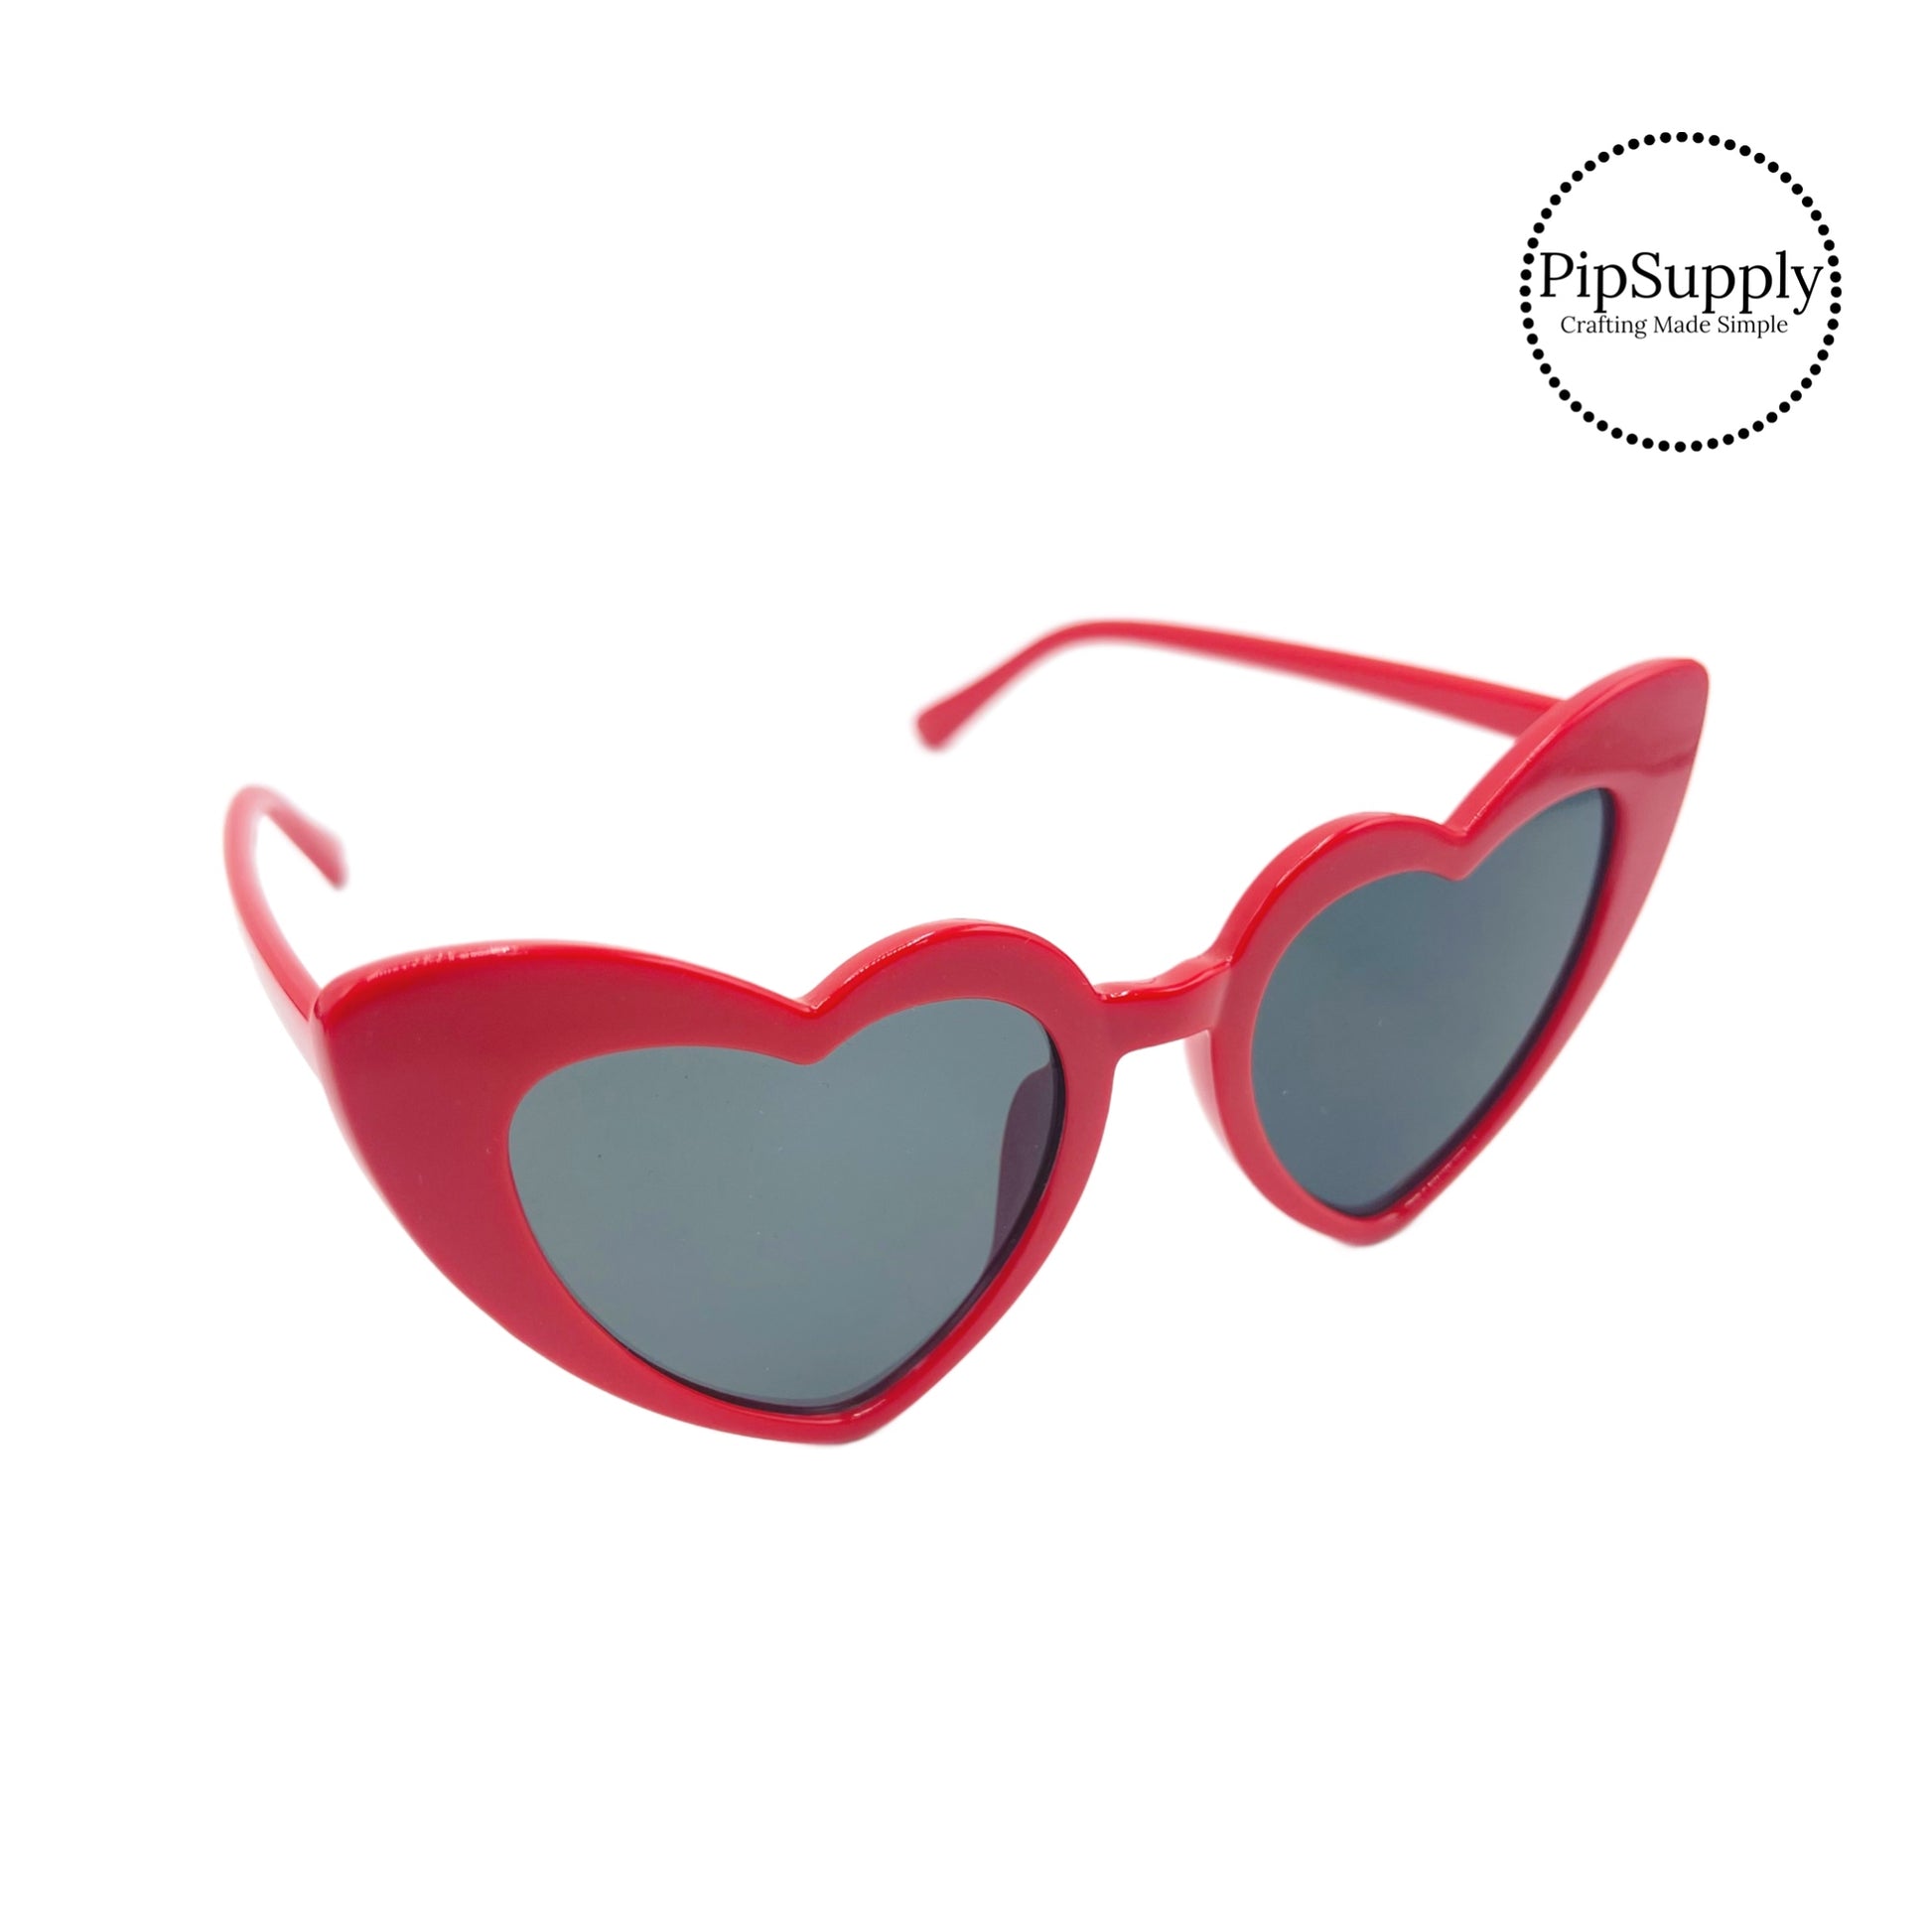 Solid red heart cat eye sunglasses